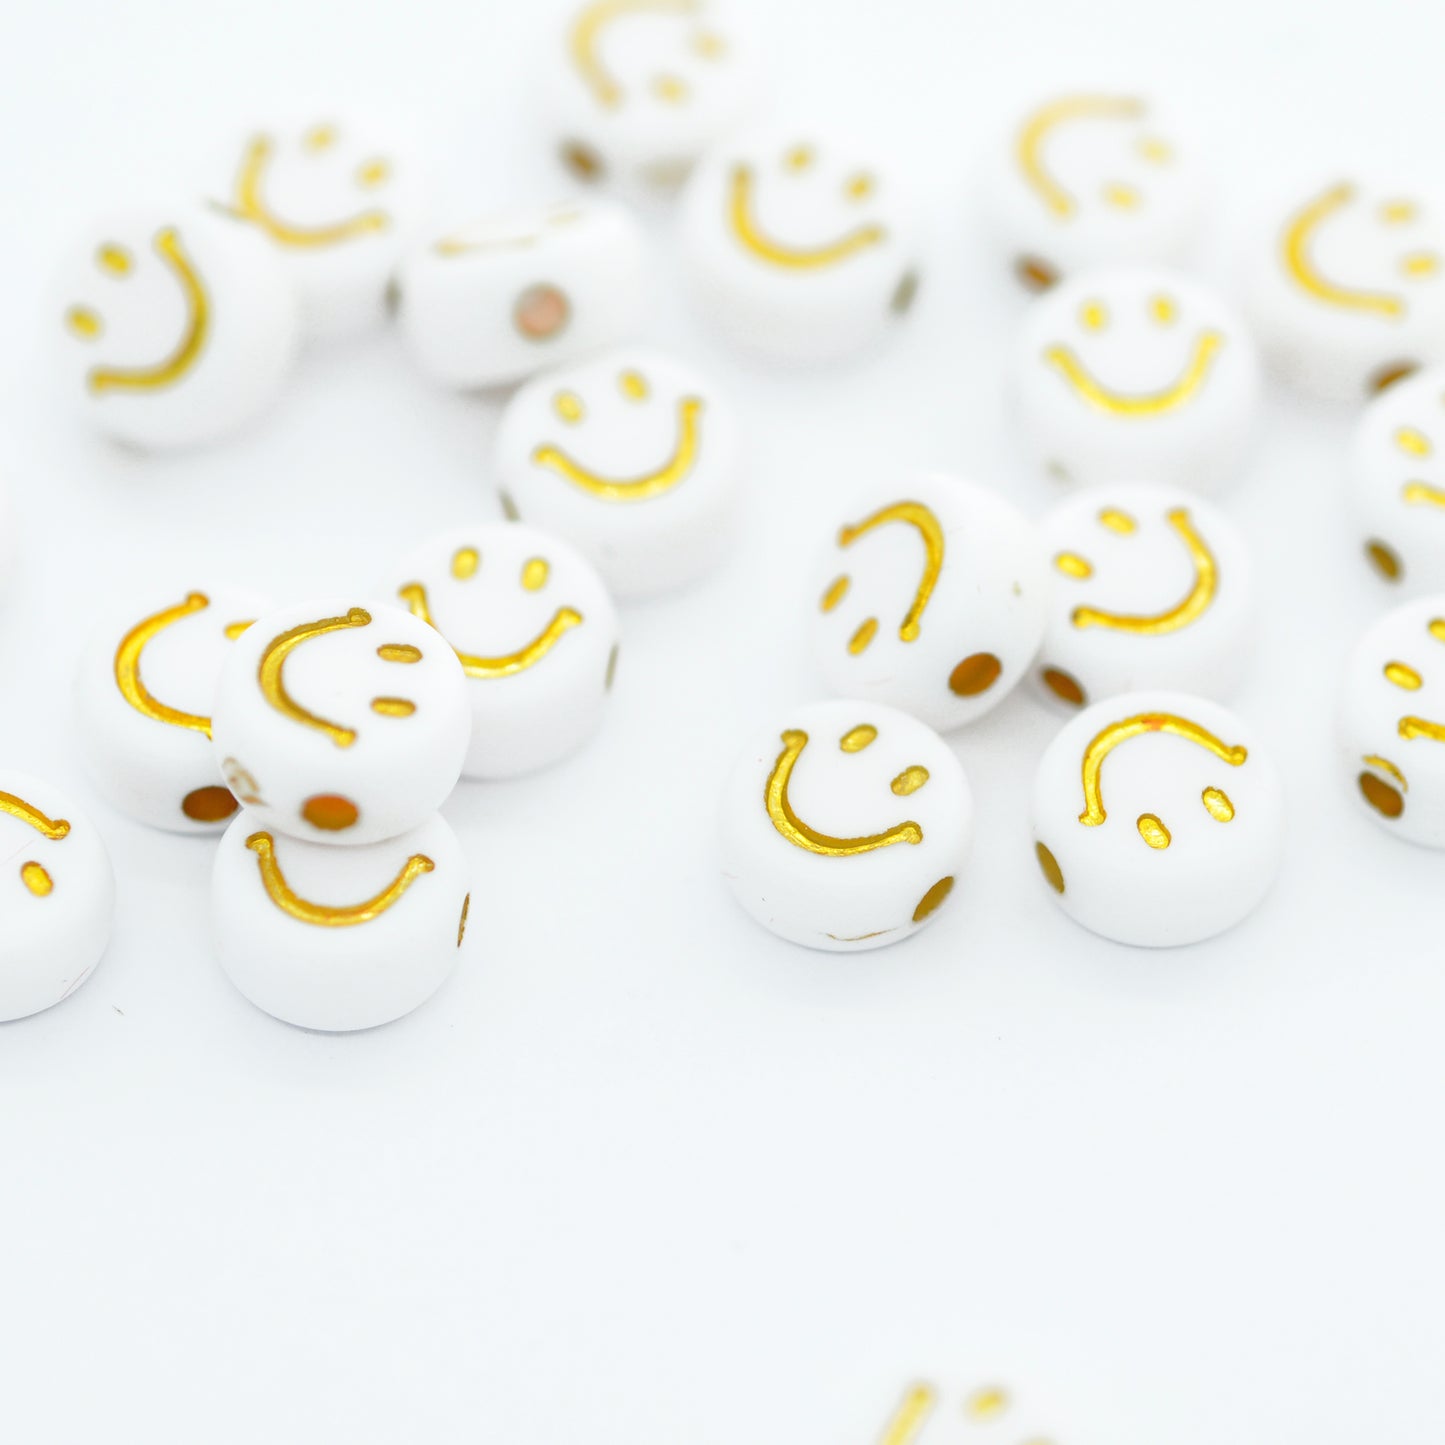 Acryl Smiley gold weiss / 7mm / 10 Stk.